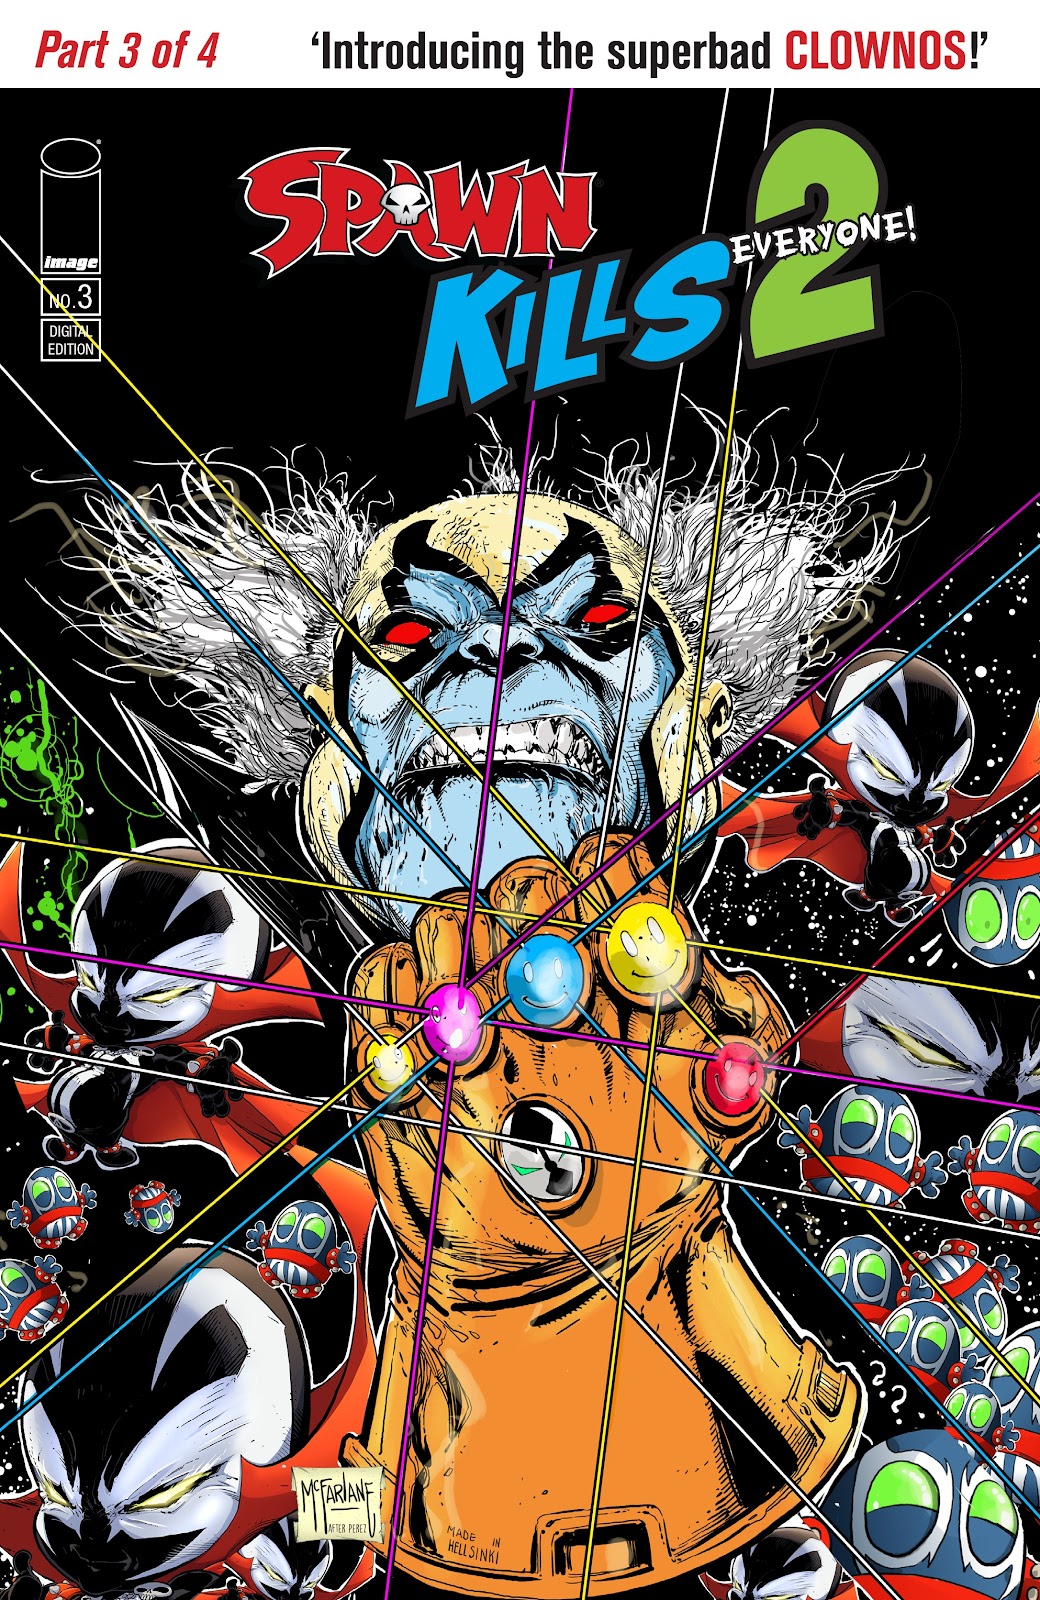 Spawn Kills Everyone Too issue 3 - Page 1